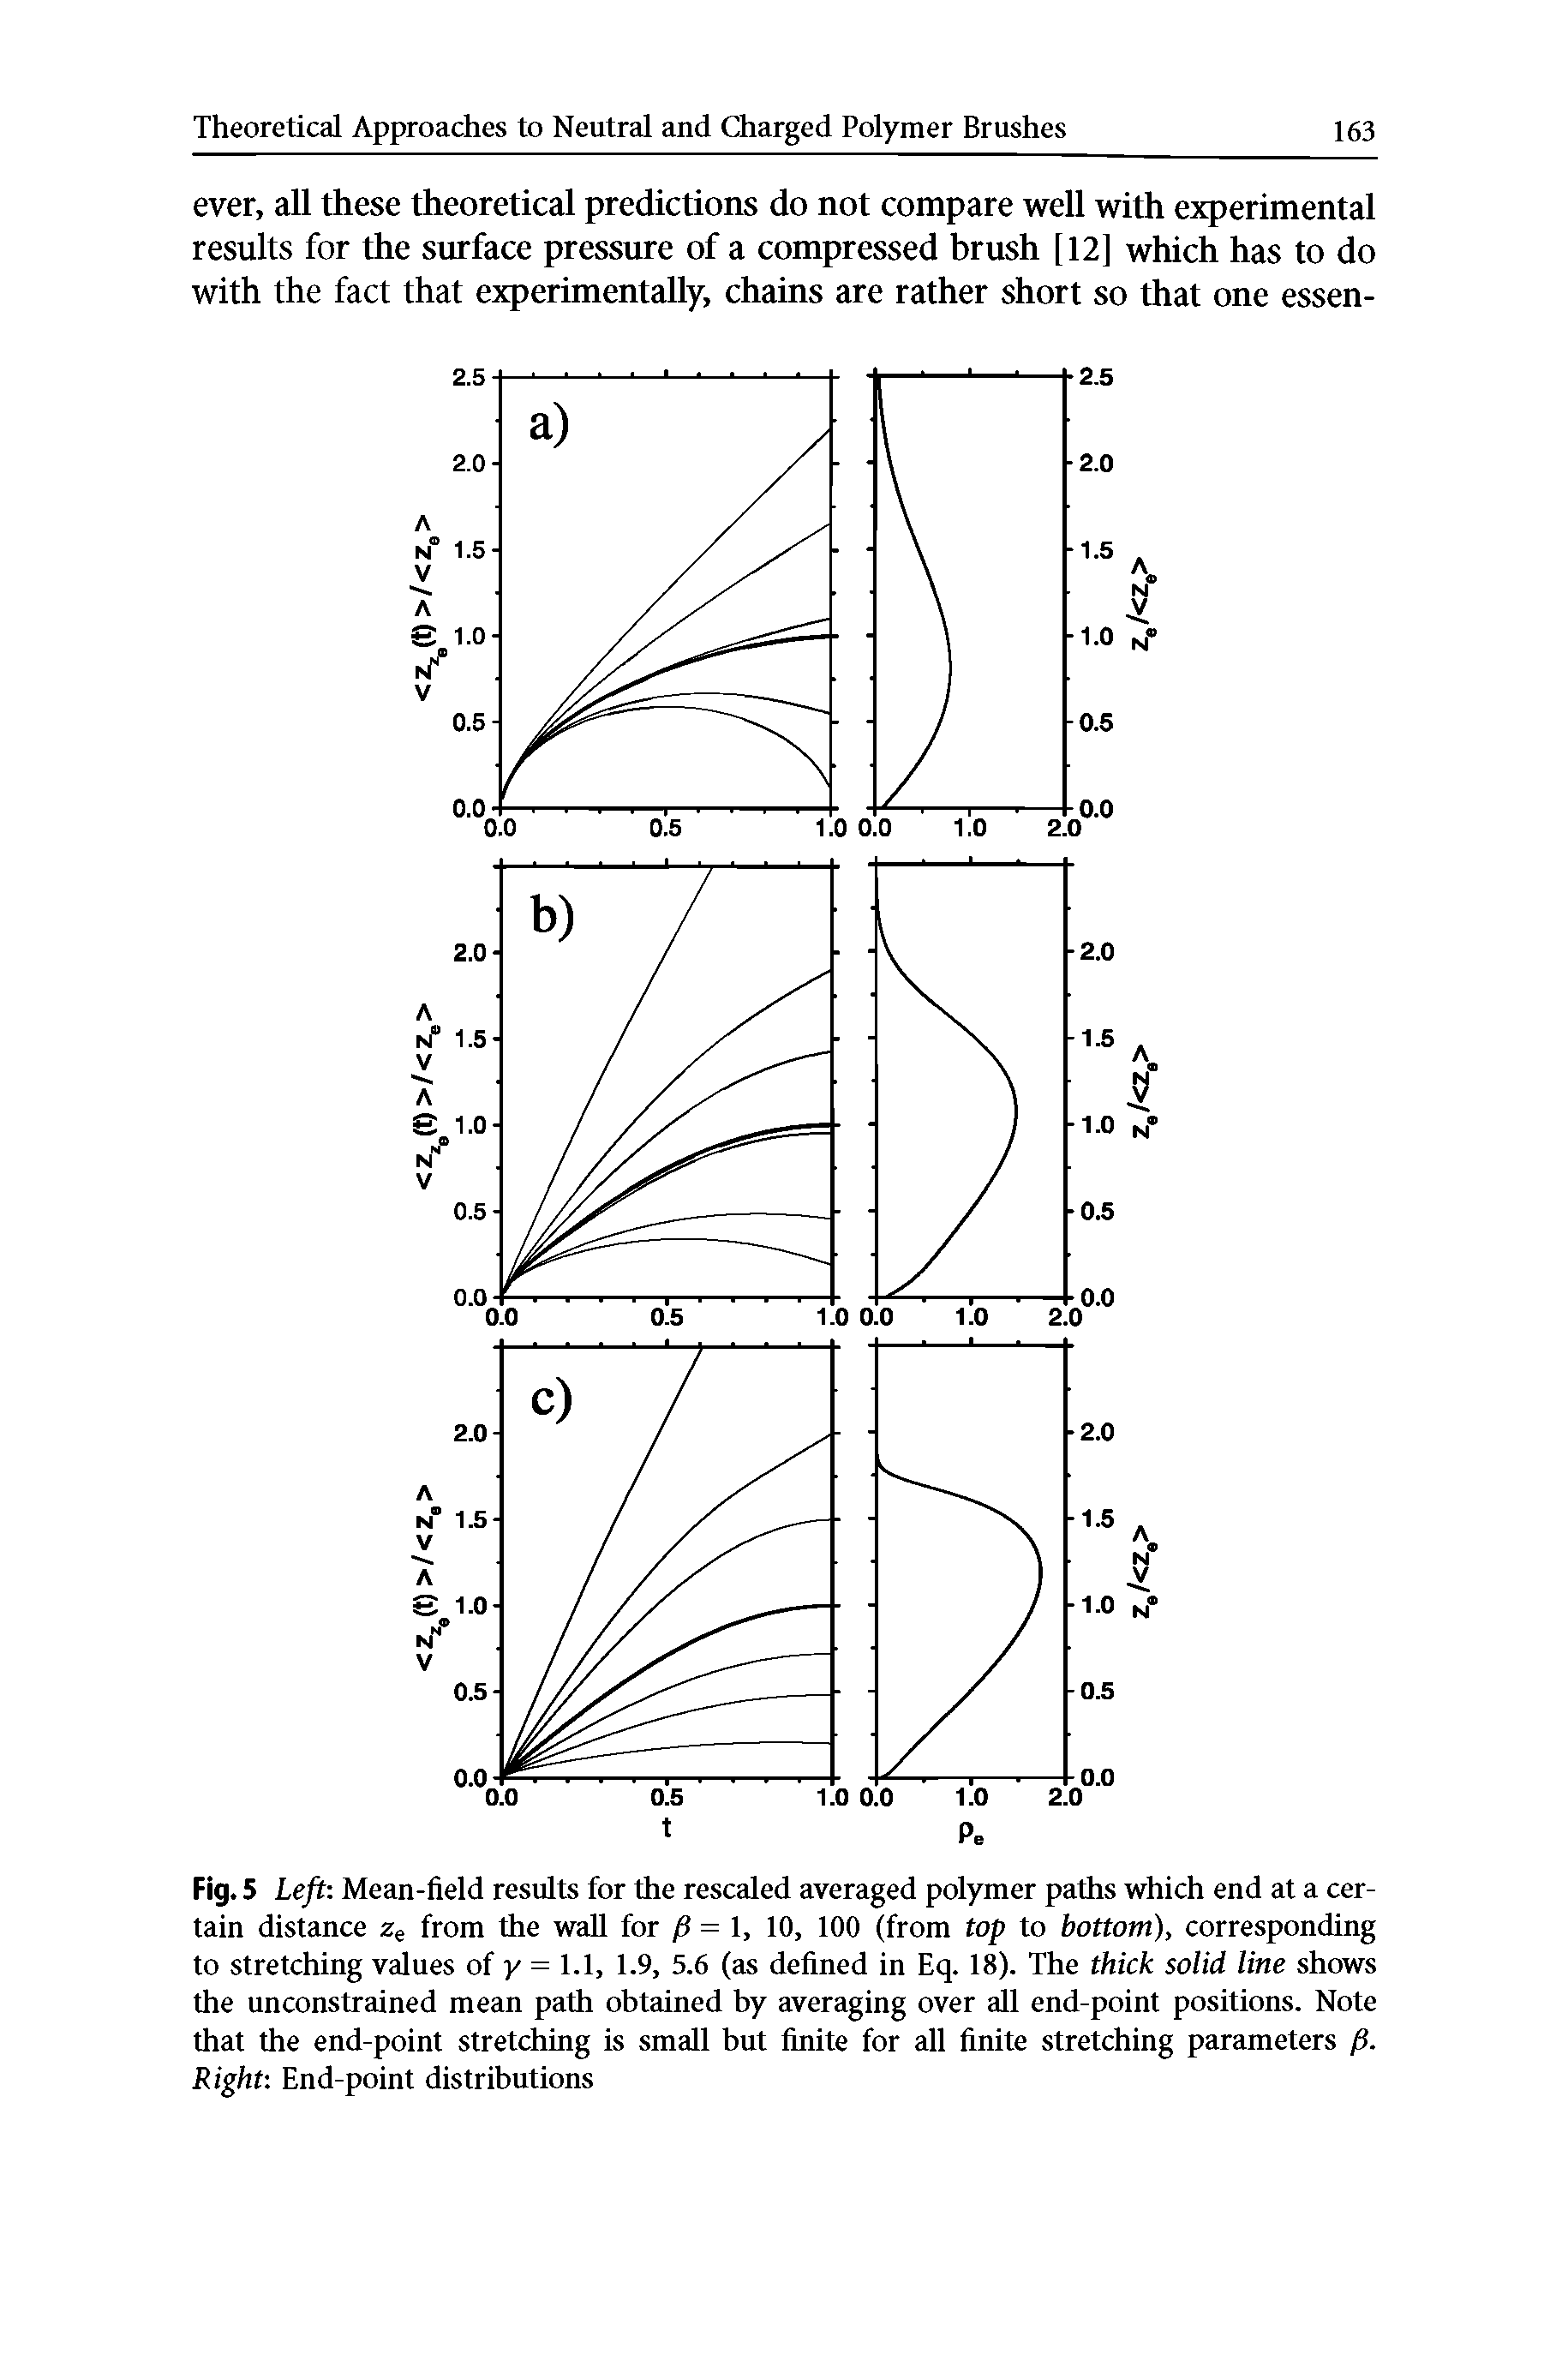 Fig. 5 Left Mean-field results for the rescaled averaged polymer paths which end at a certain distance Ze from the wall for (S = I, 10, 100 (from top to bottom), corresponding to stretching values of y = 1.1, 1.9, 5.6 (as defined in Eq. 18). The thick solid line shows the unconstrained mean path obtained by averaging over all end-point positions. Note that the end-point stretching is small but finite for all finite stretching parameters p. Right End-point distributions...